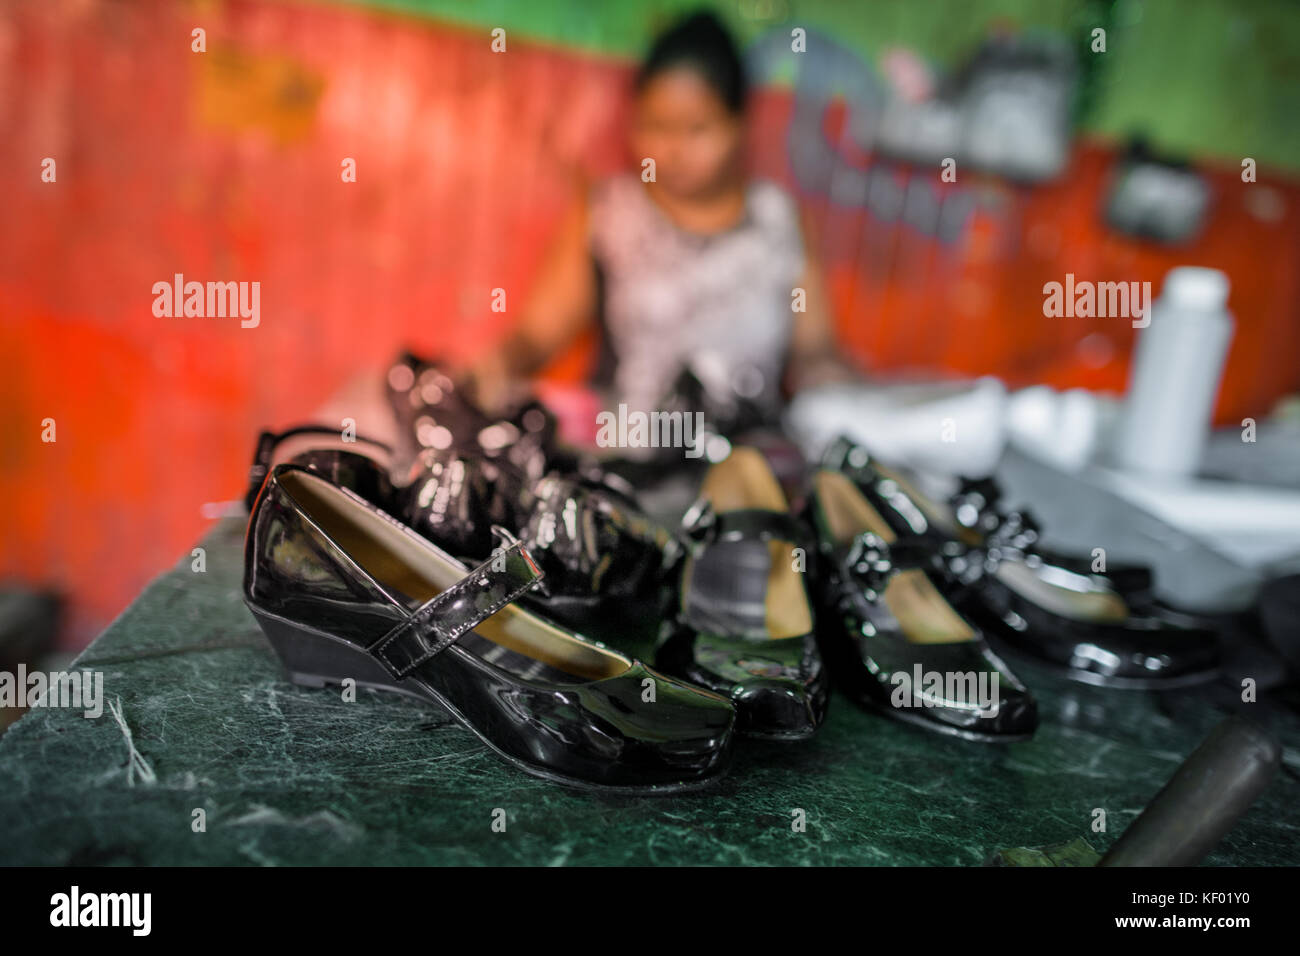 Newly made pairs of women’s patent leather shoes are seen placed on the table in a shoe making workshop in San Salvador, El Salvador, 16 November 2016 Stock Photo